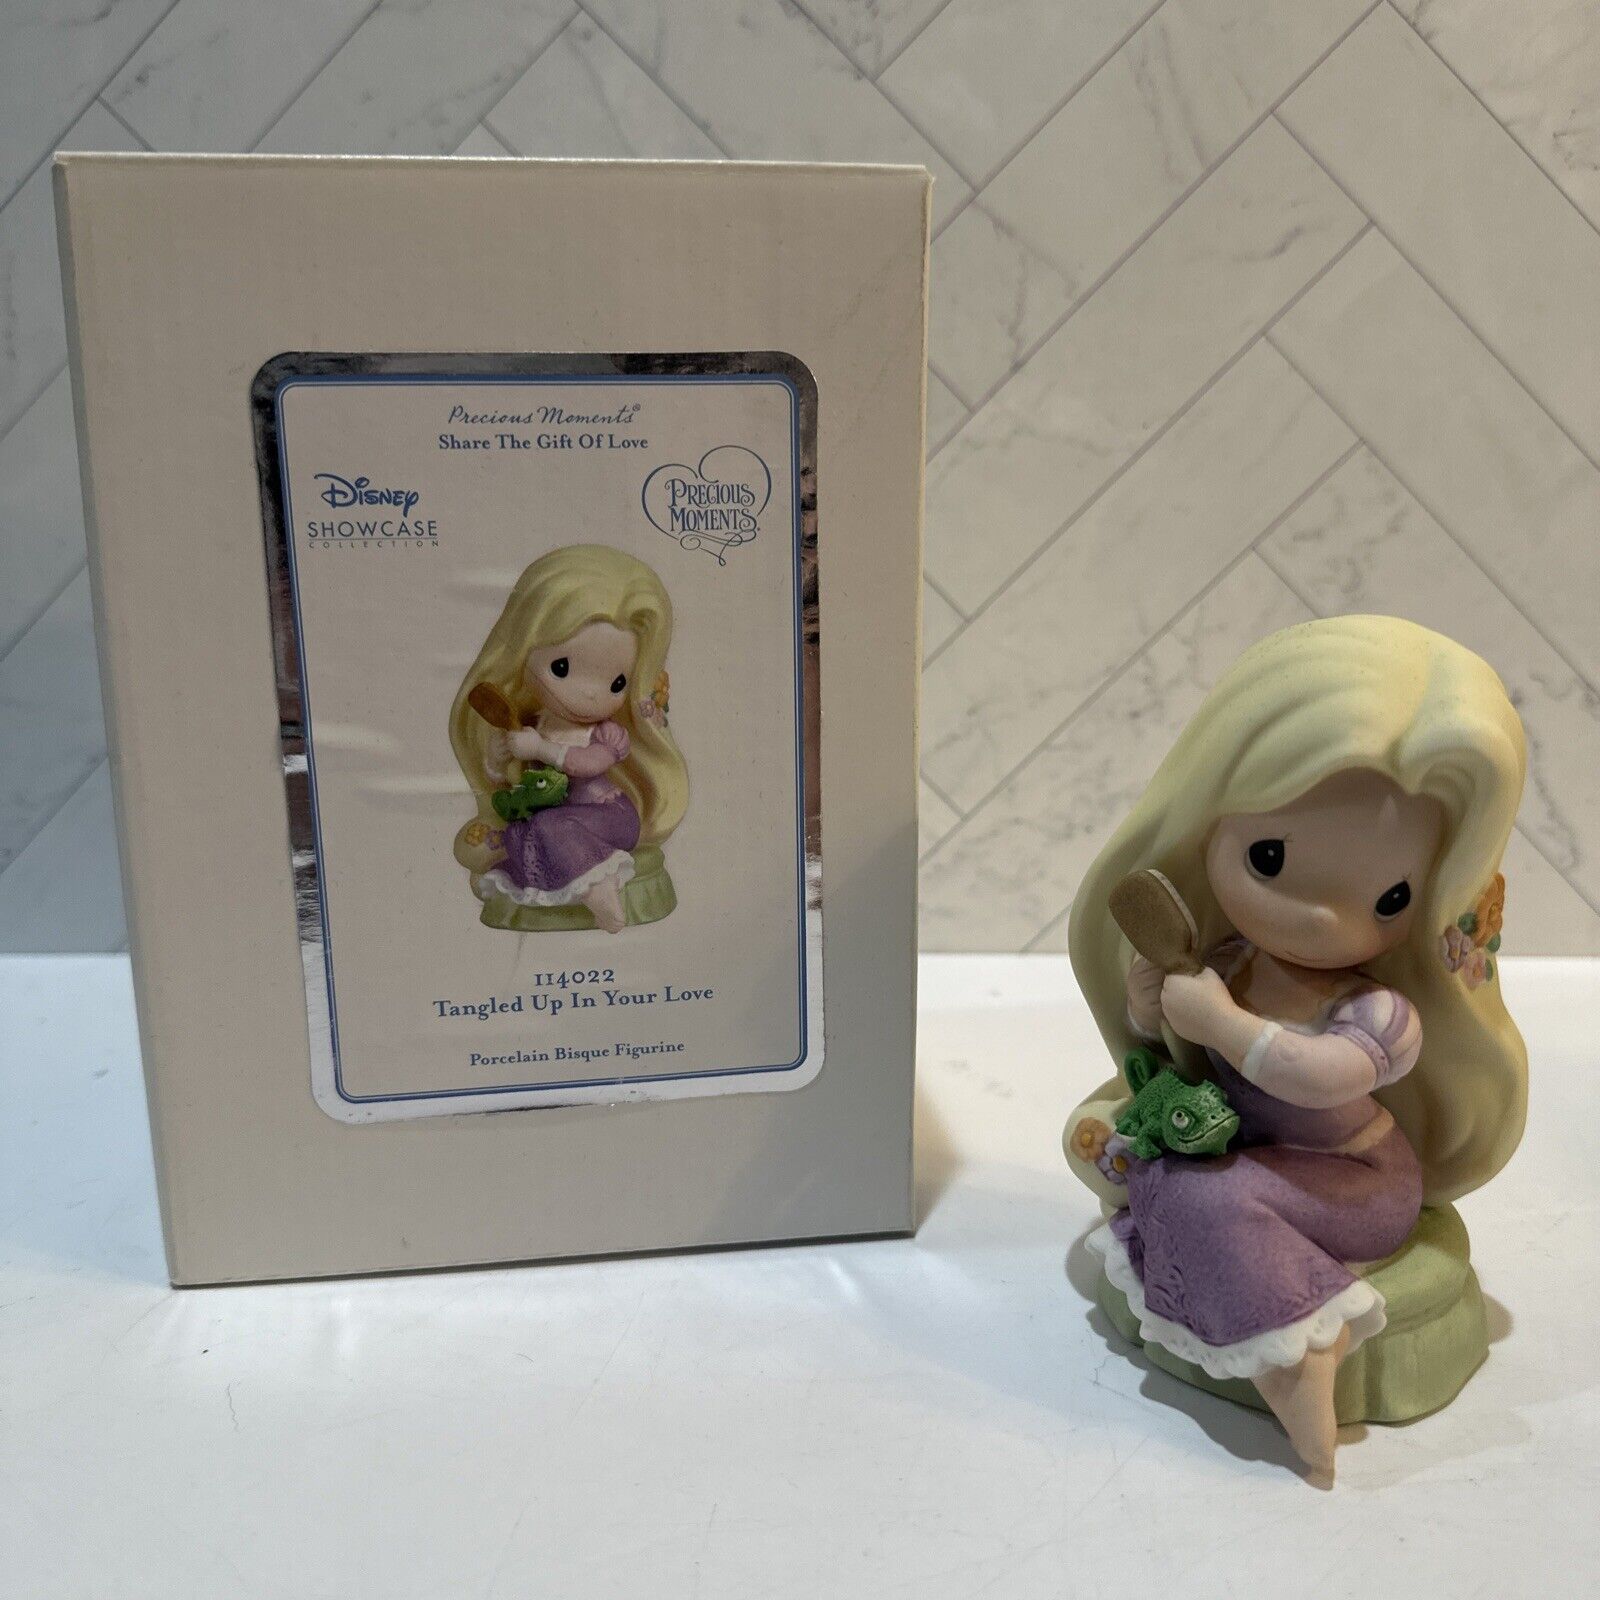 Precious Moments Disney Rapunzel Figurine Tangled Up In Your Love in Box 